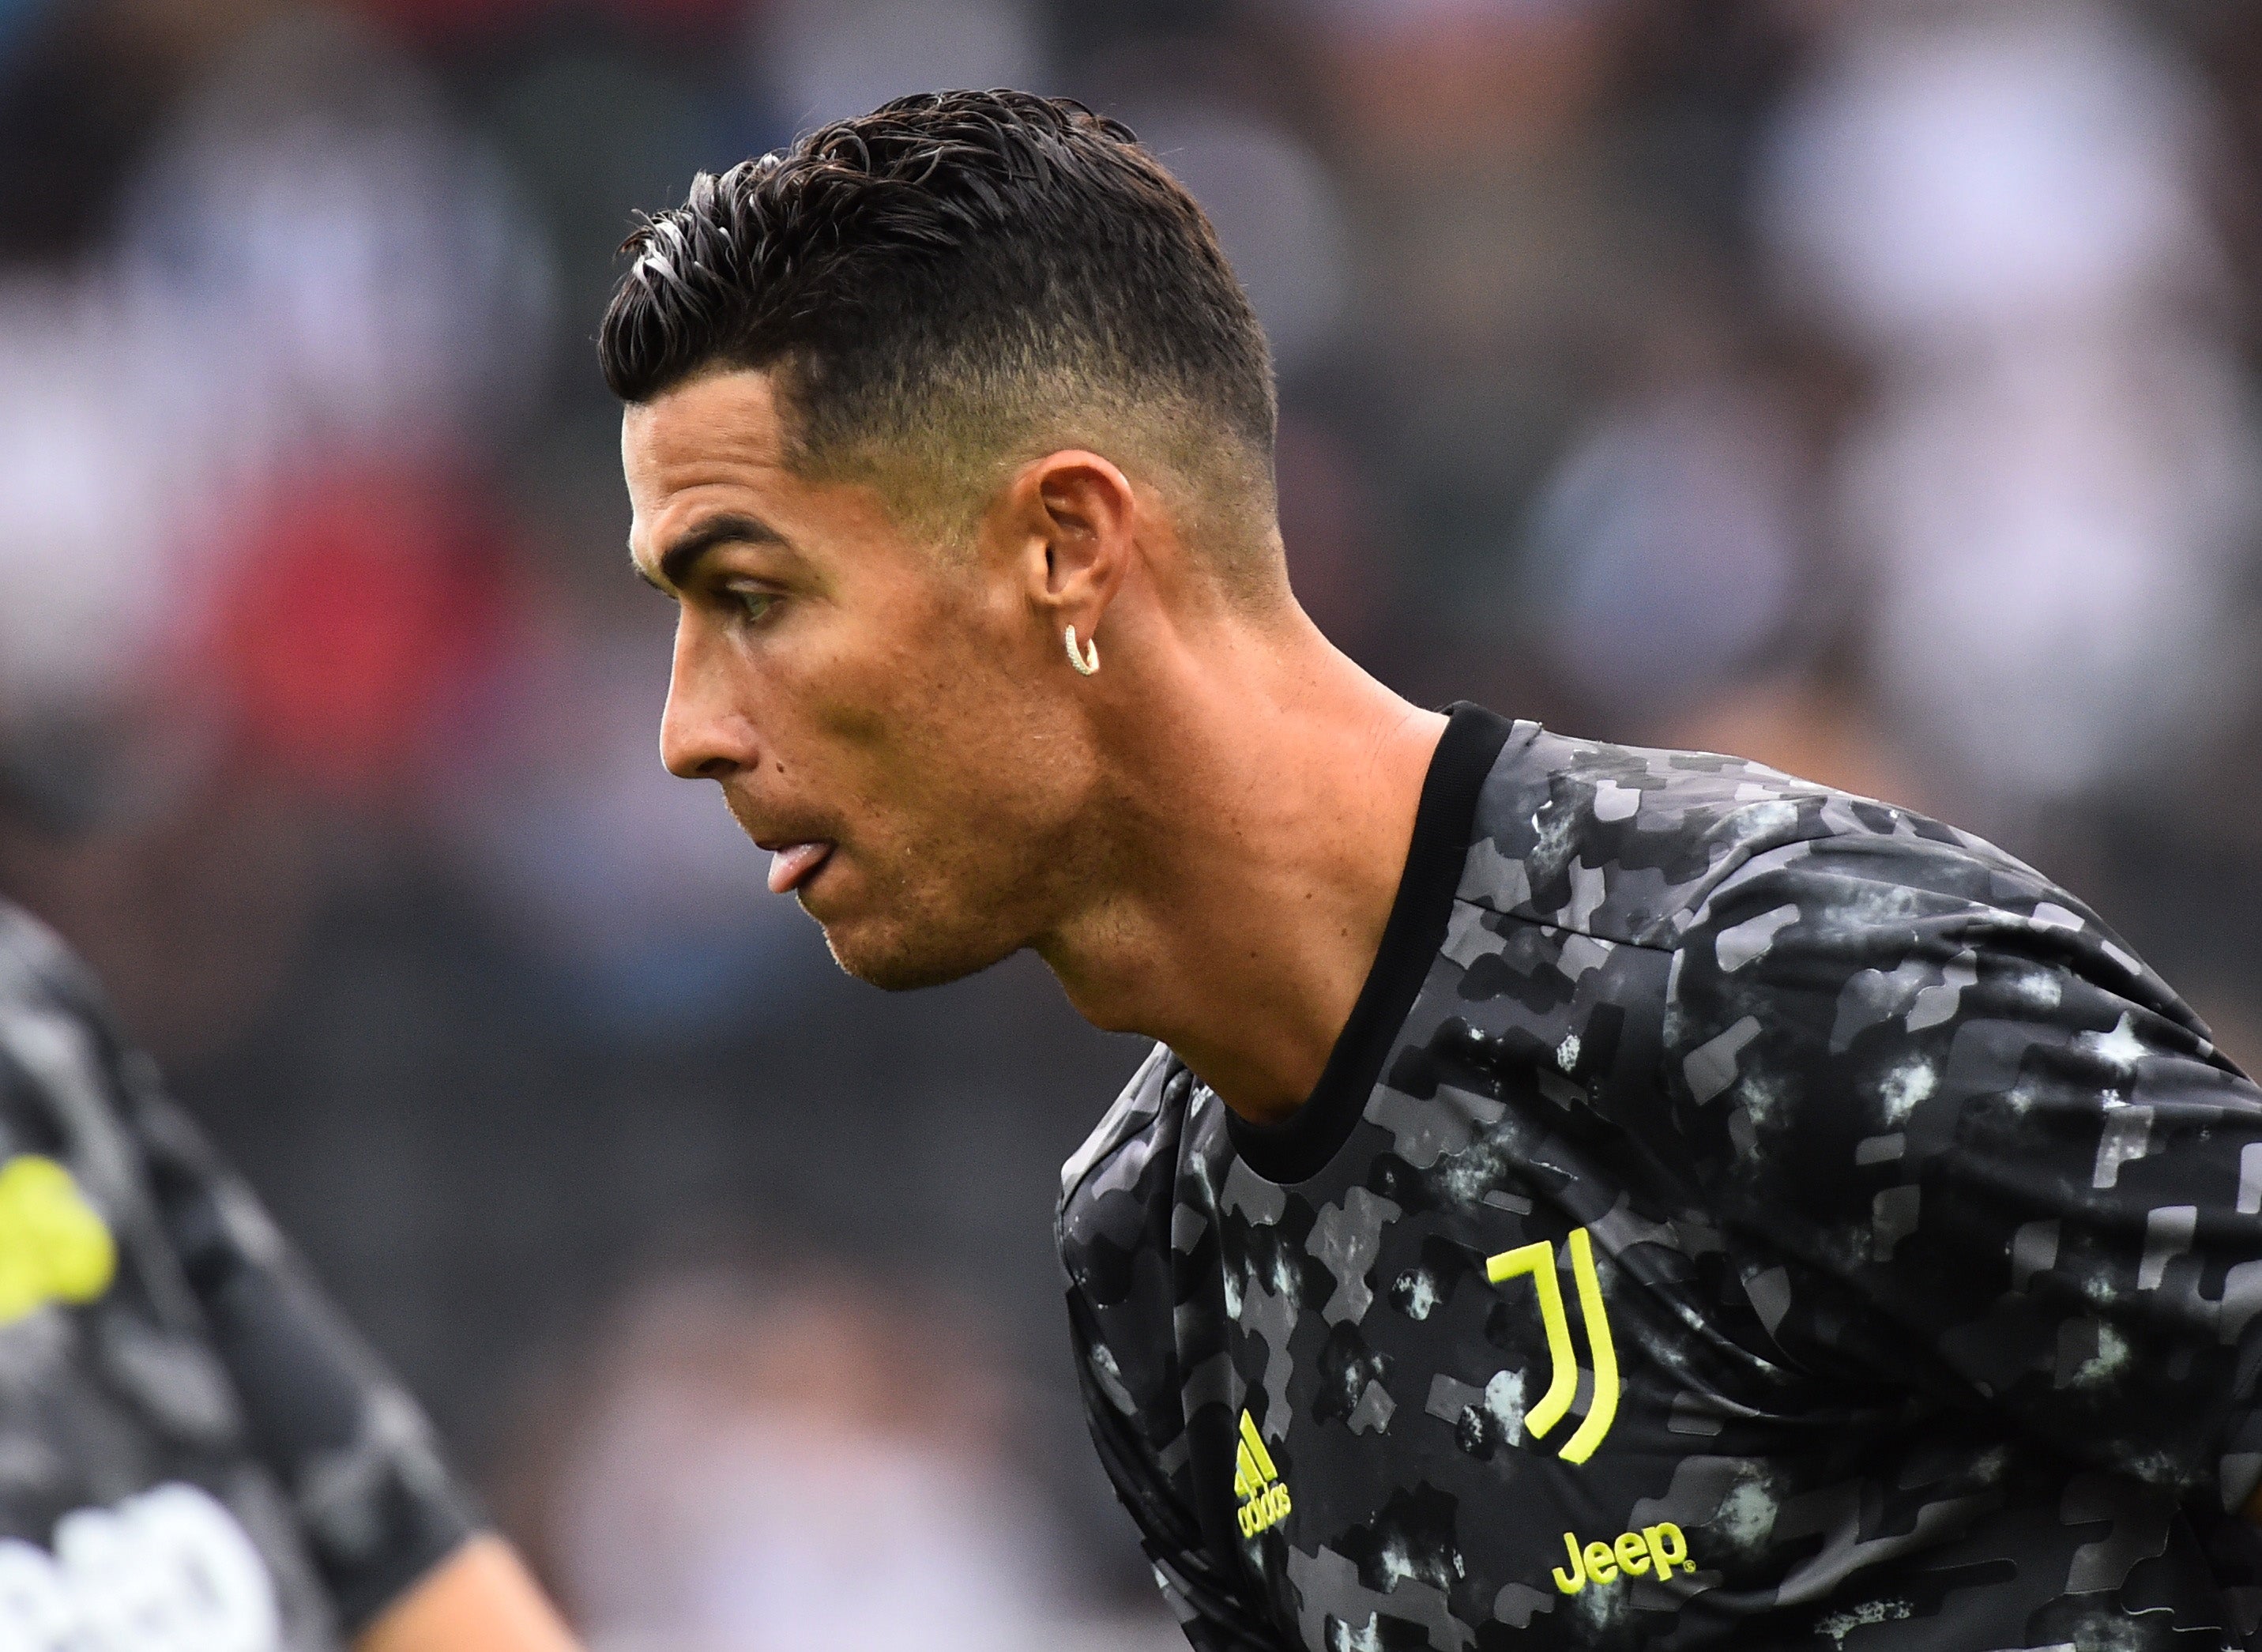 Cristiano Ronaldo pictured in Juventus shirt for first time as transfer  edges closer | Football | Sport | Express.co.uk